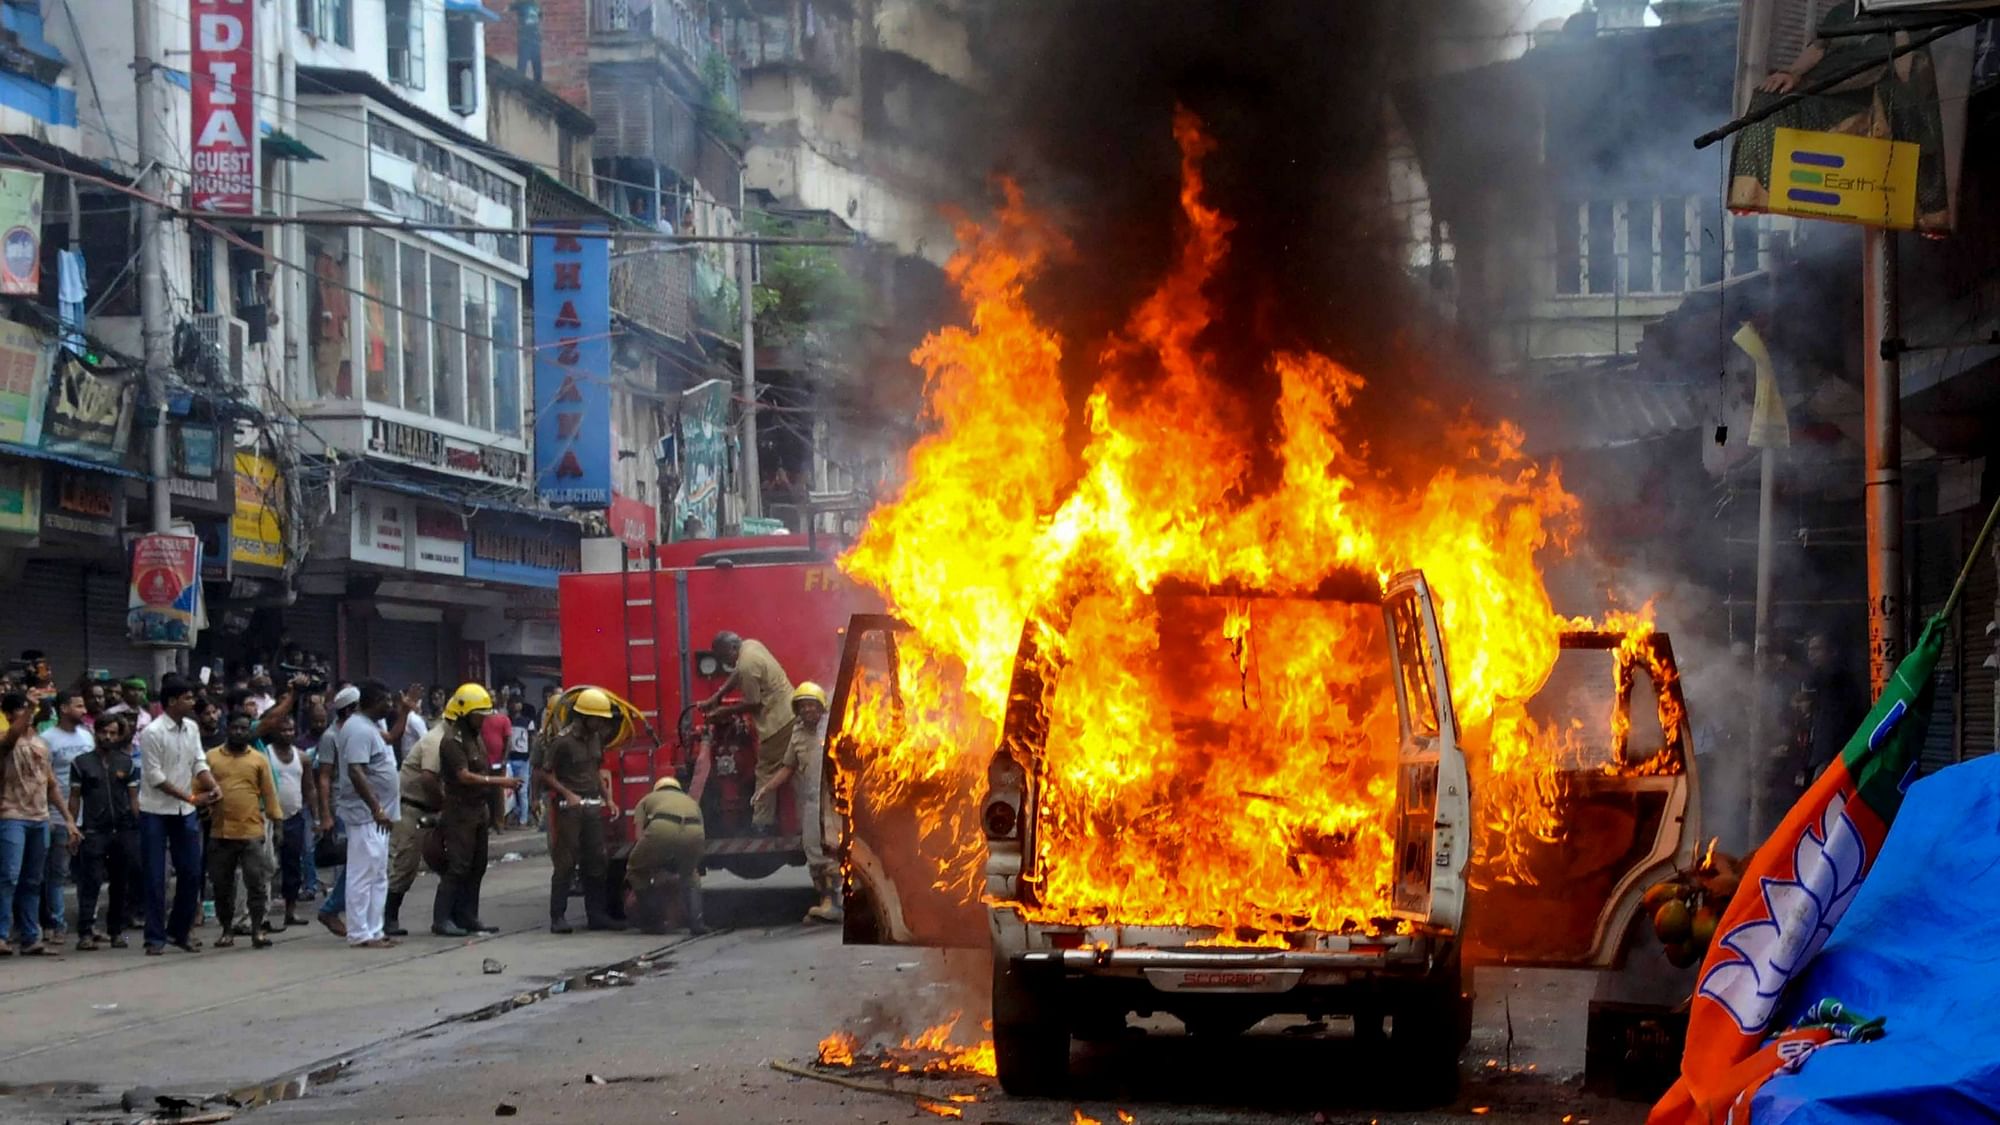 <div class="paragraphs"><p>A police vehicle was set on fire by some miscreants near Nakhoda Mosque in Kolkata.</p></div>